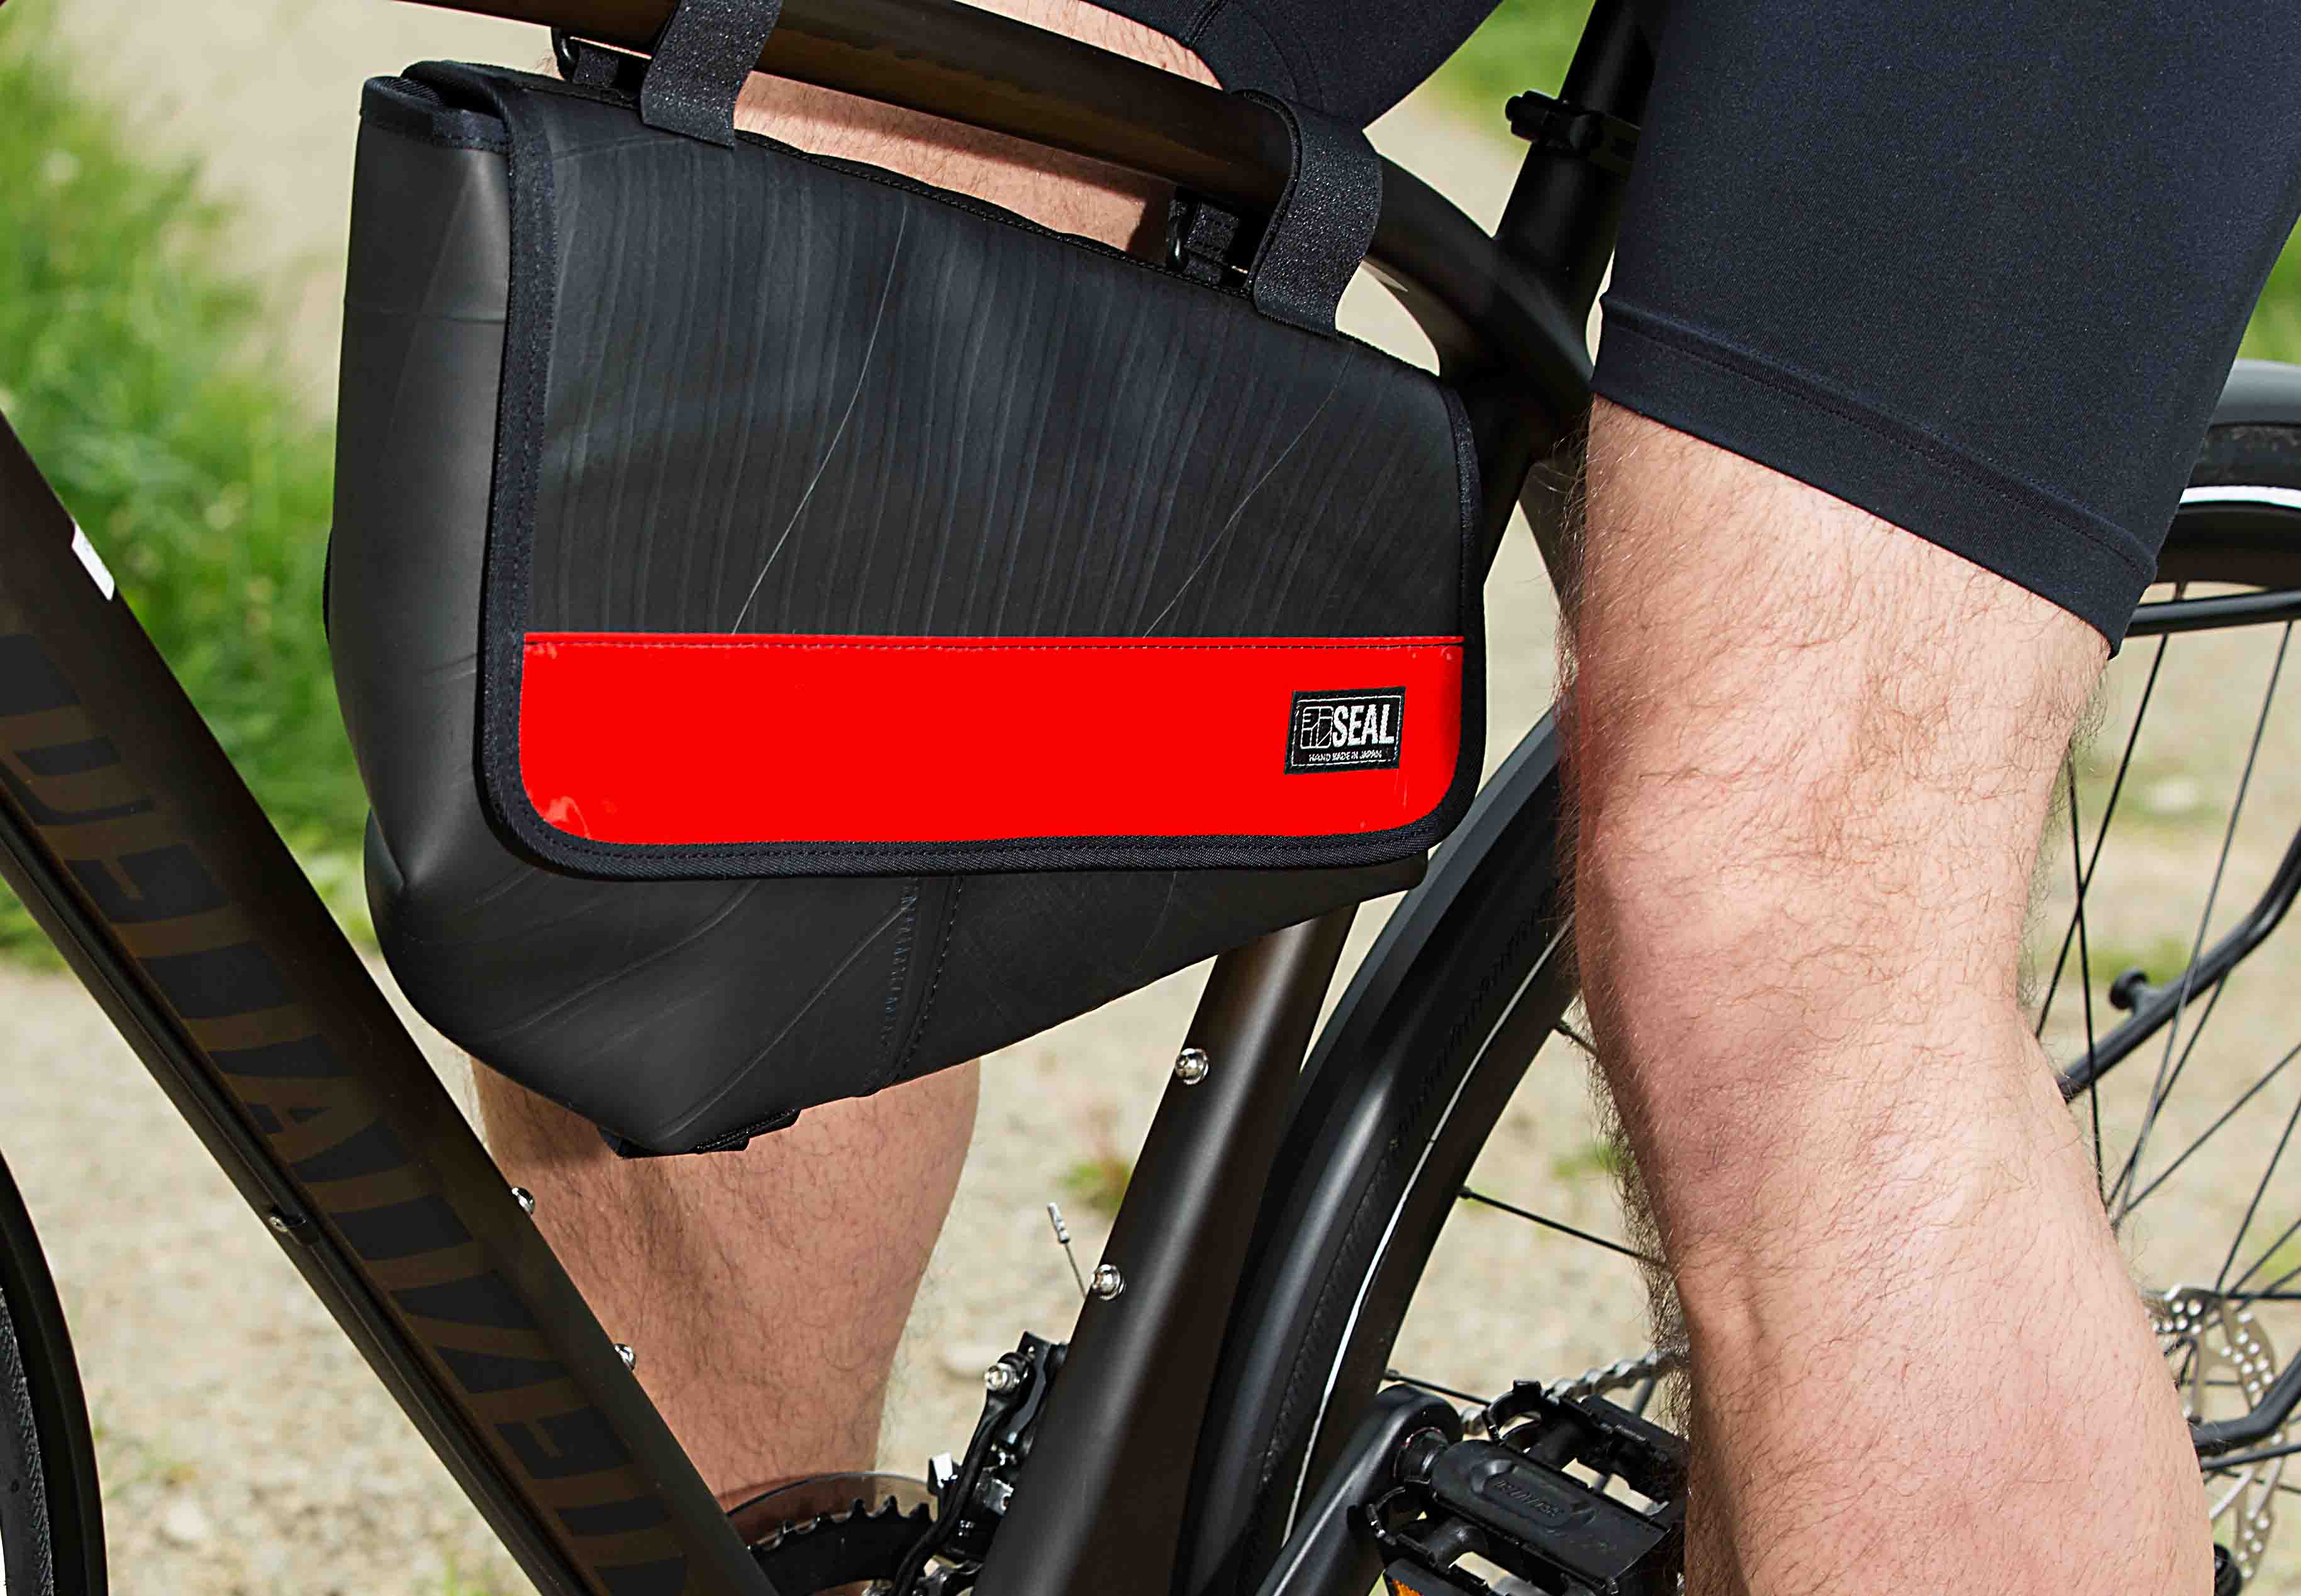 SEAL Recycled Tire tube bicycle bag